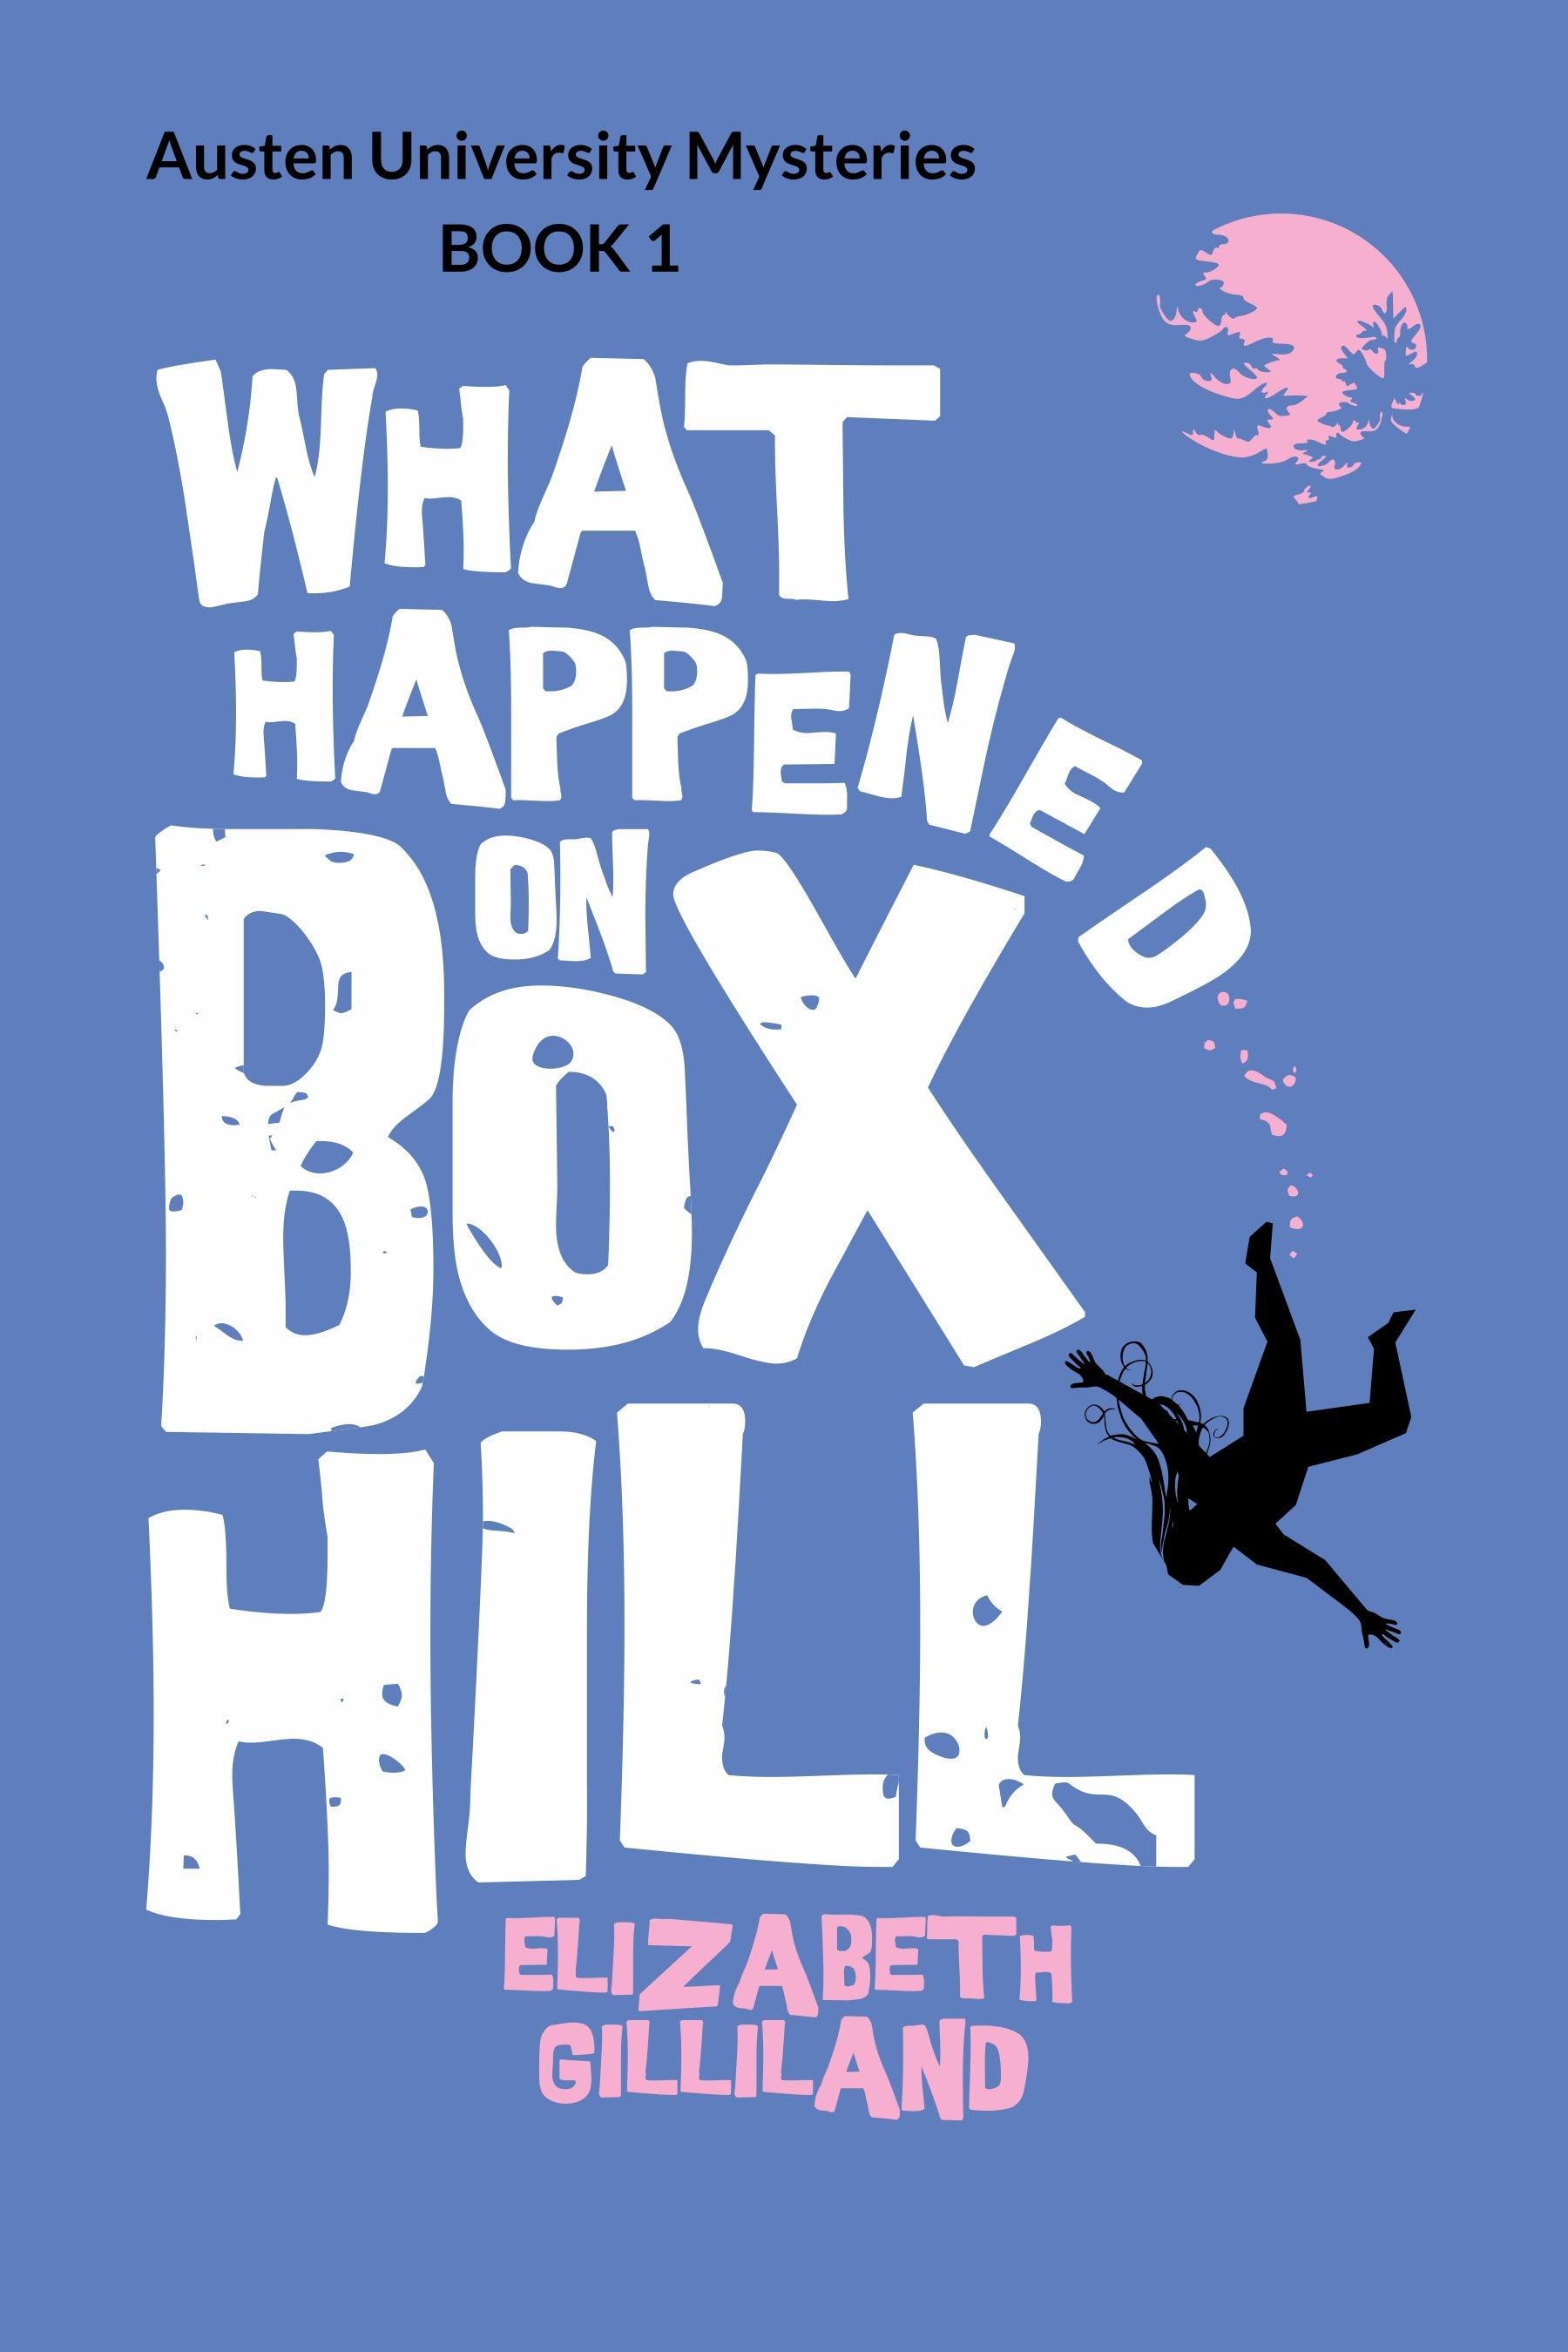 What happened on Box Hill 